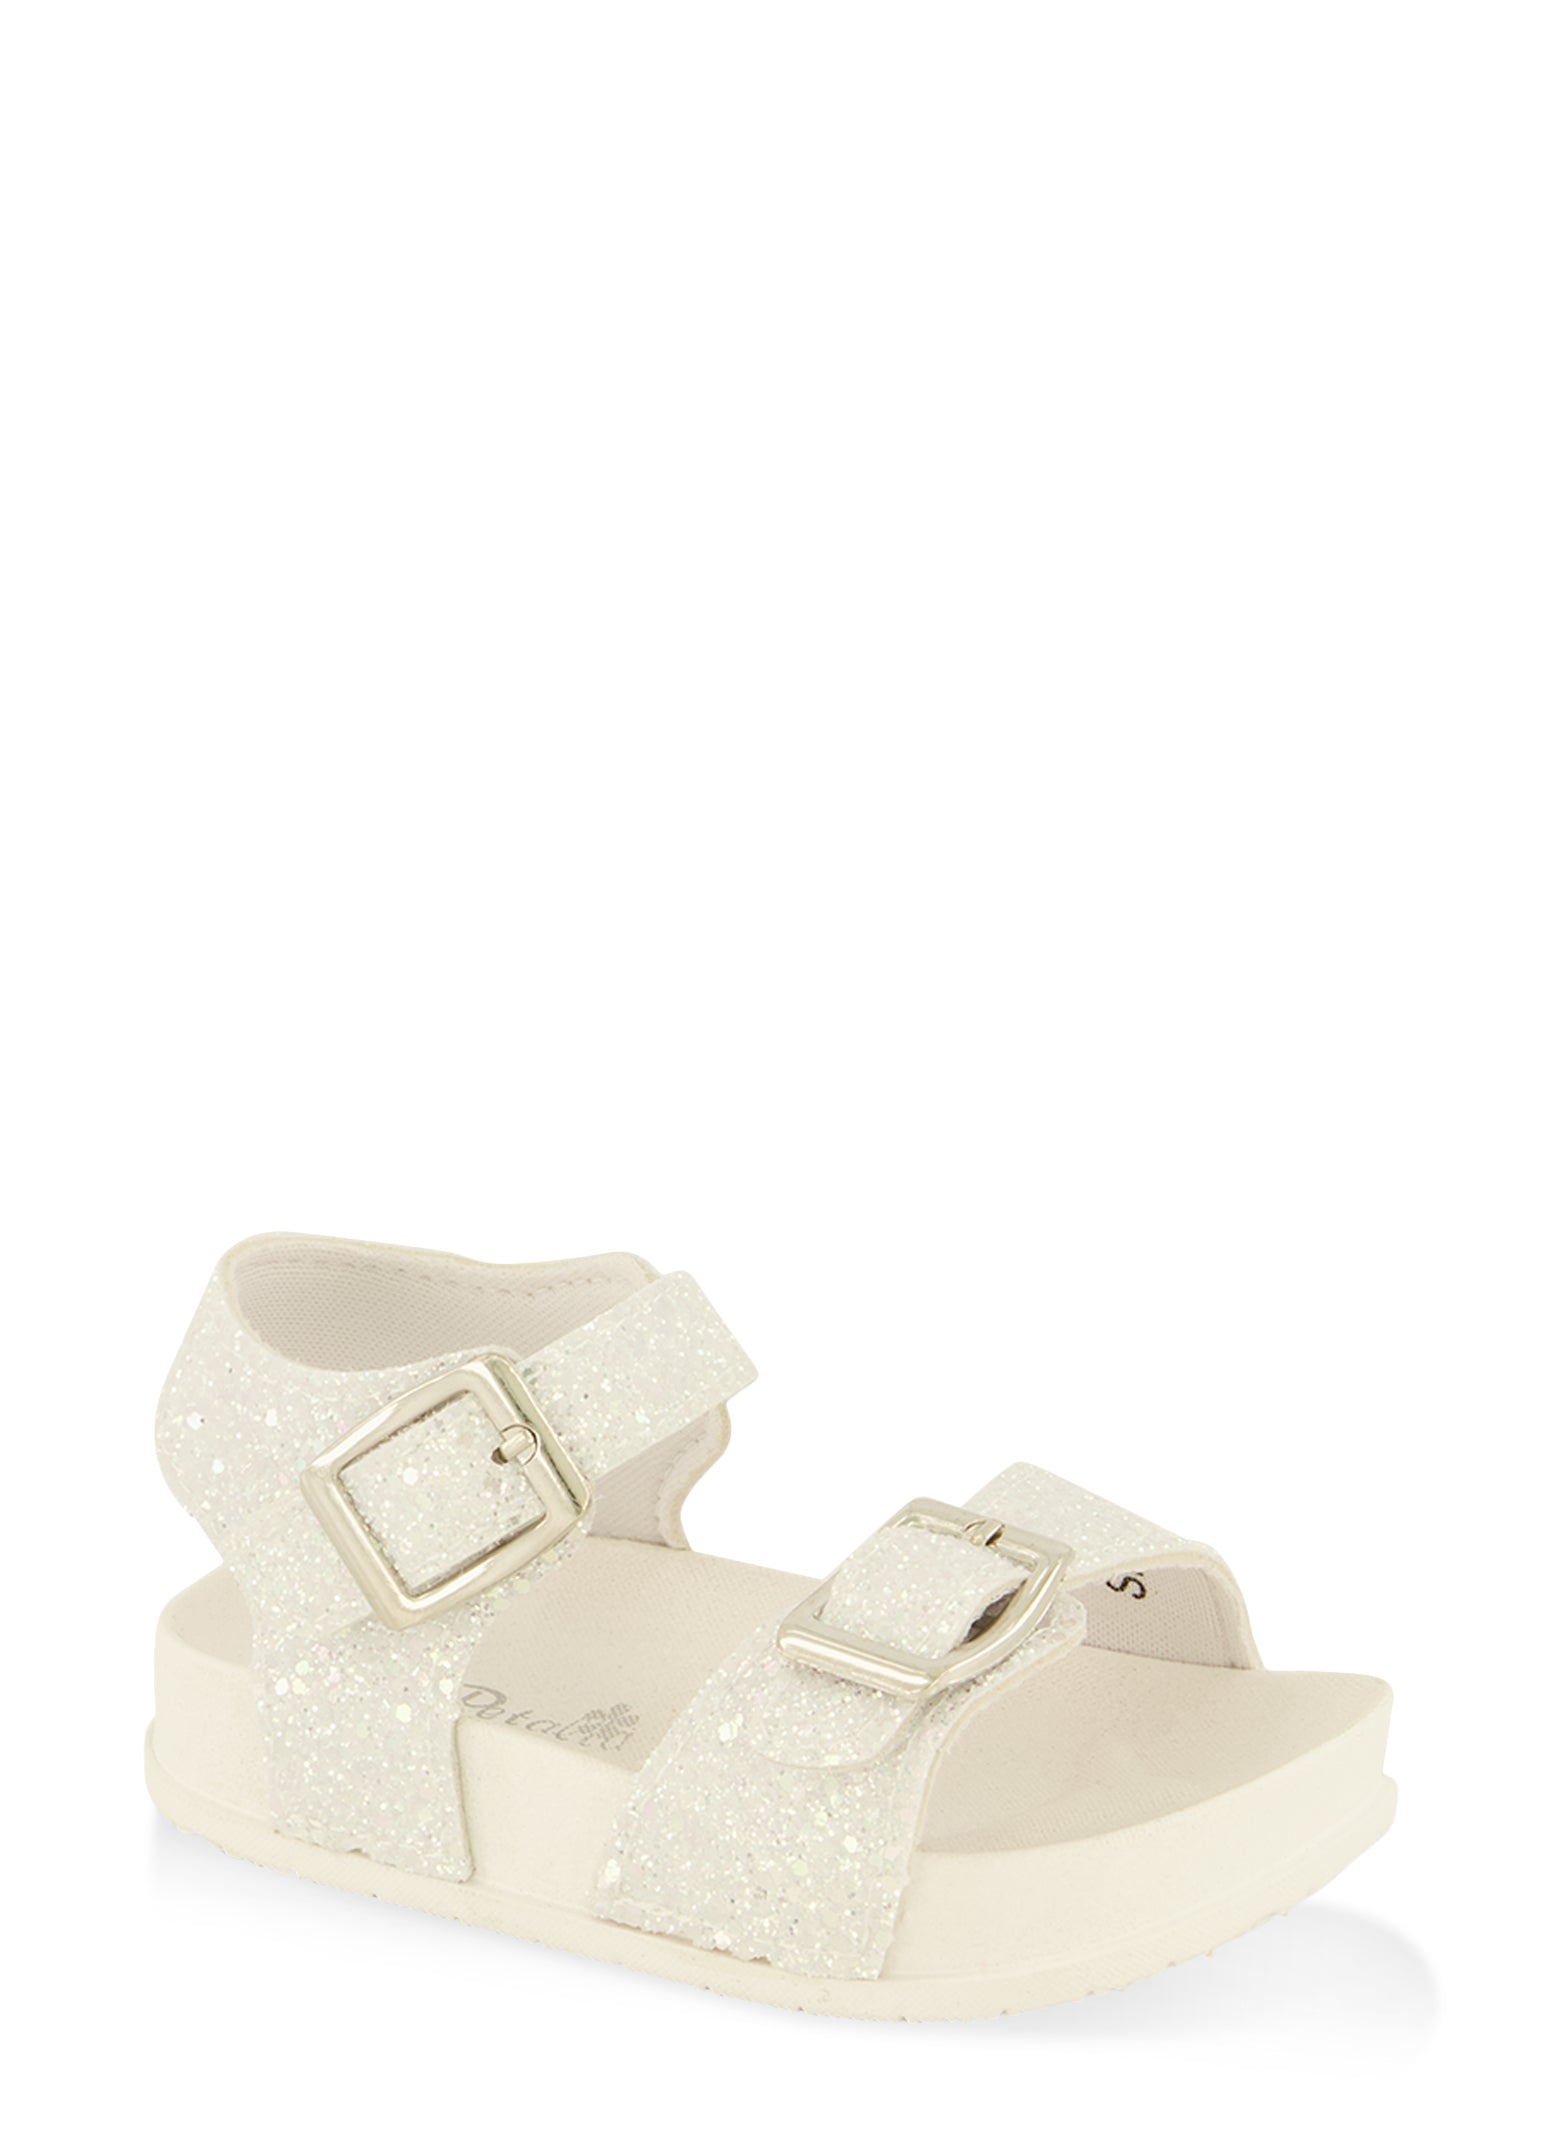 Womens Toddler Girls Glitter Buckle Band Ankle Strap Sandals, White,